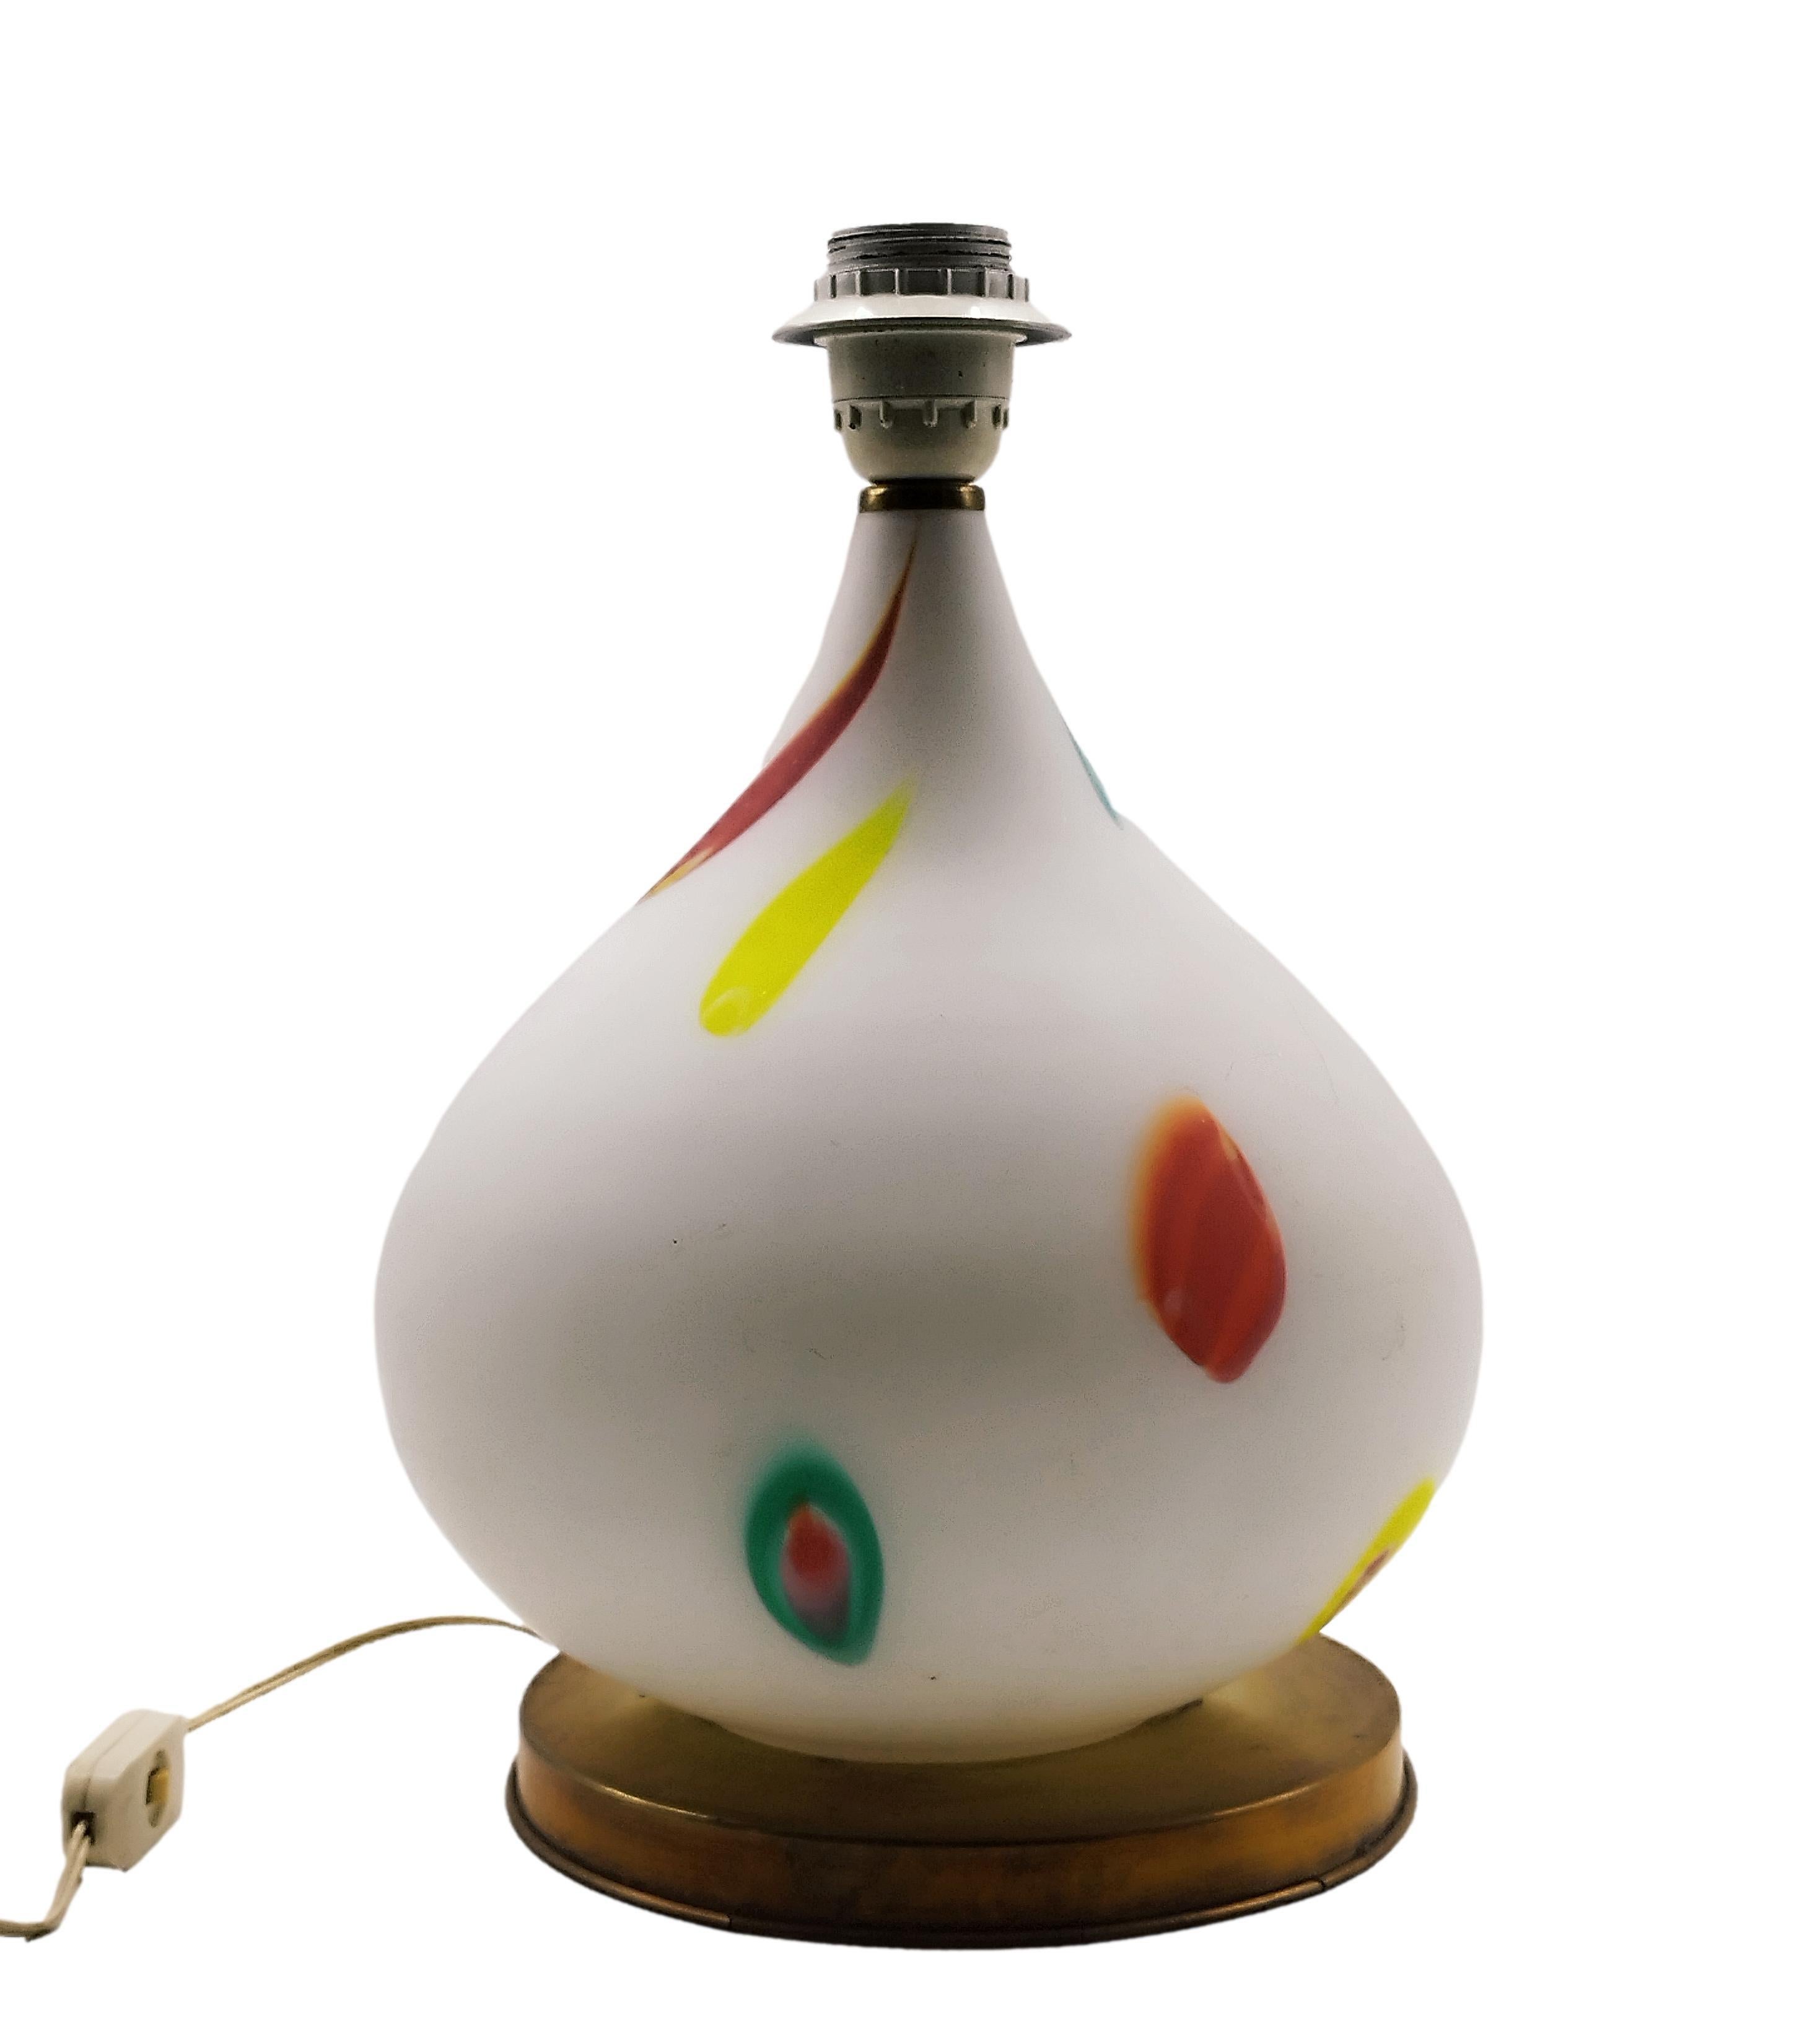 This hand-blown Murano glass table lamp with colorful details rests on a brass base.  It remains in good original condition.